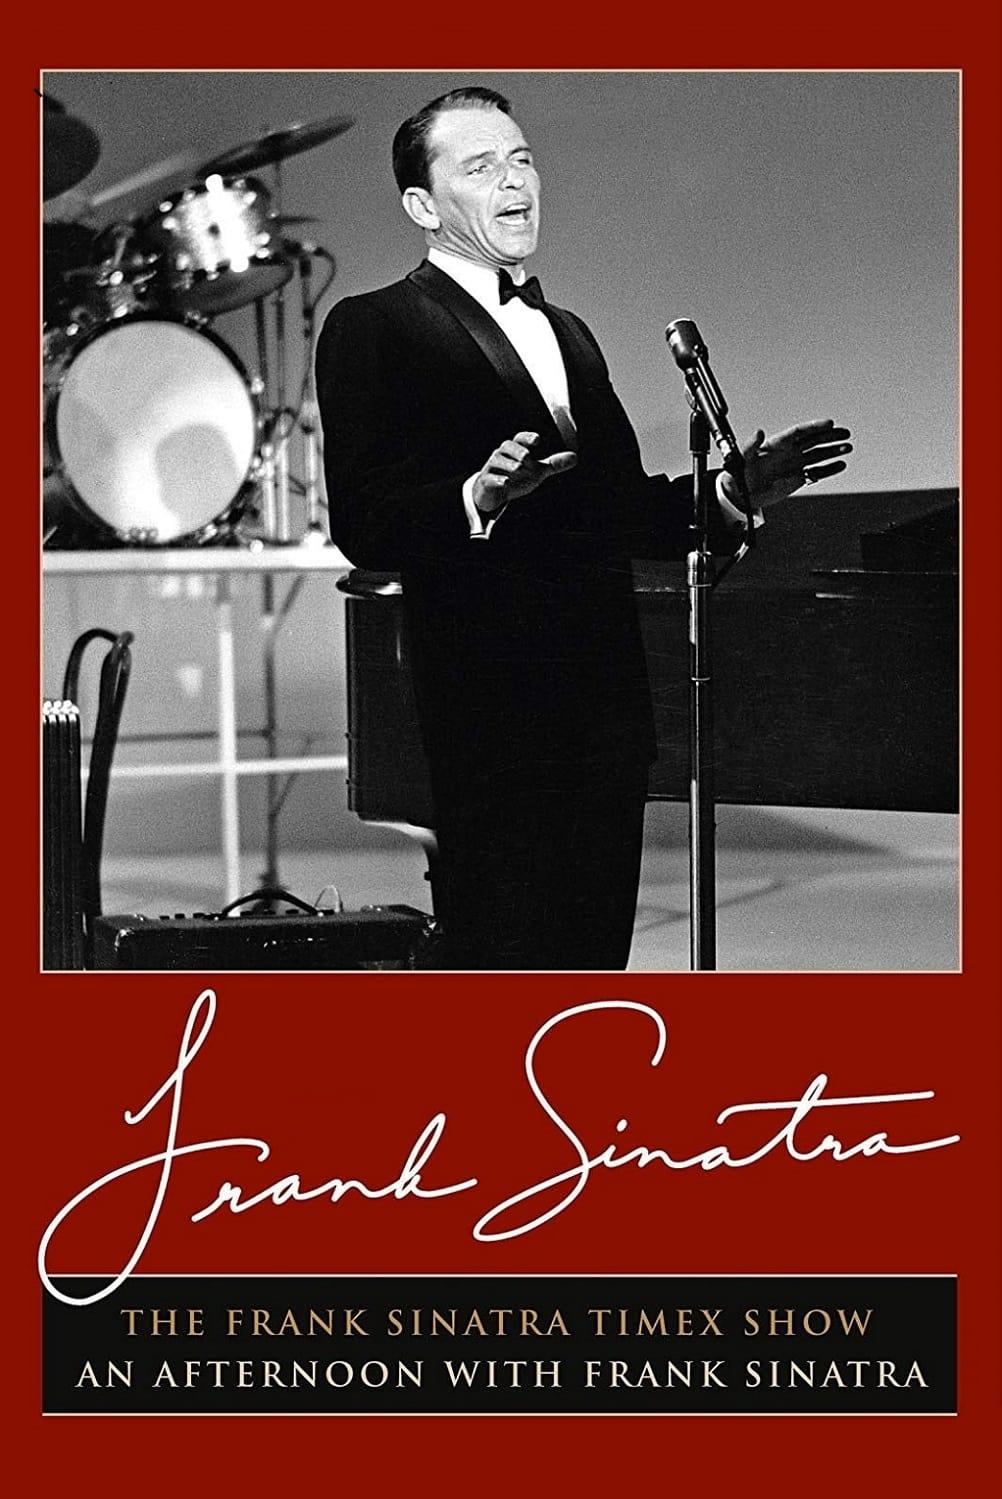 The Frank Sinatra Timex Show: An Afternoon with Frank Sinatra poster